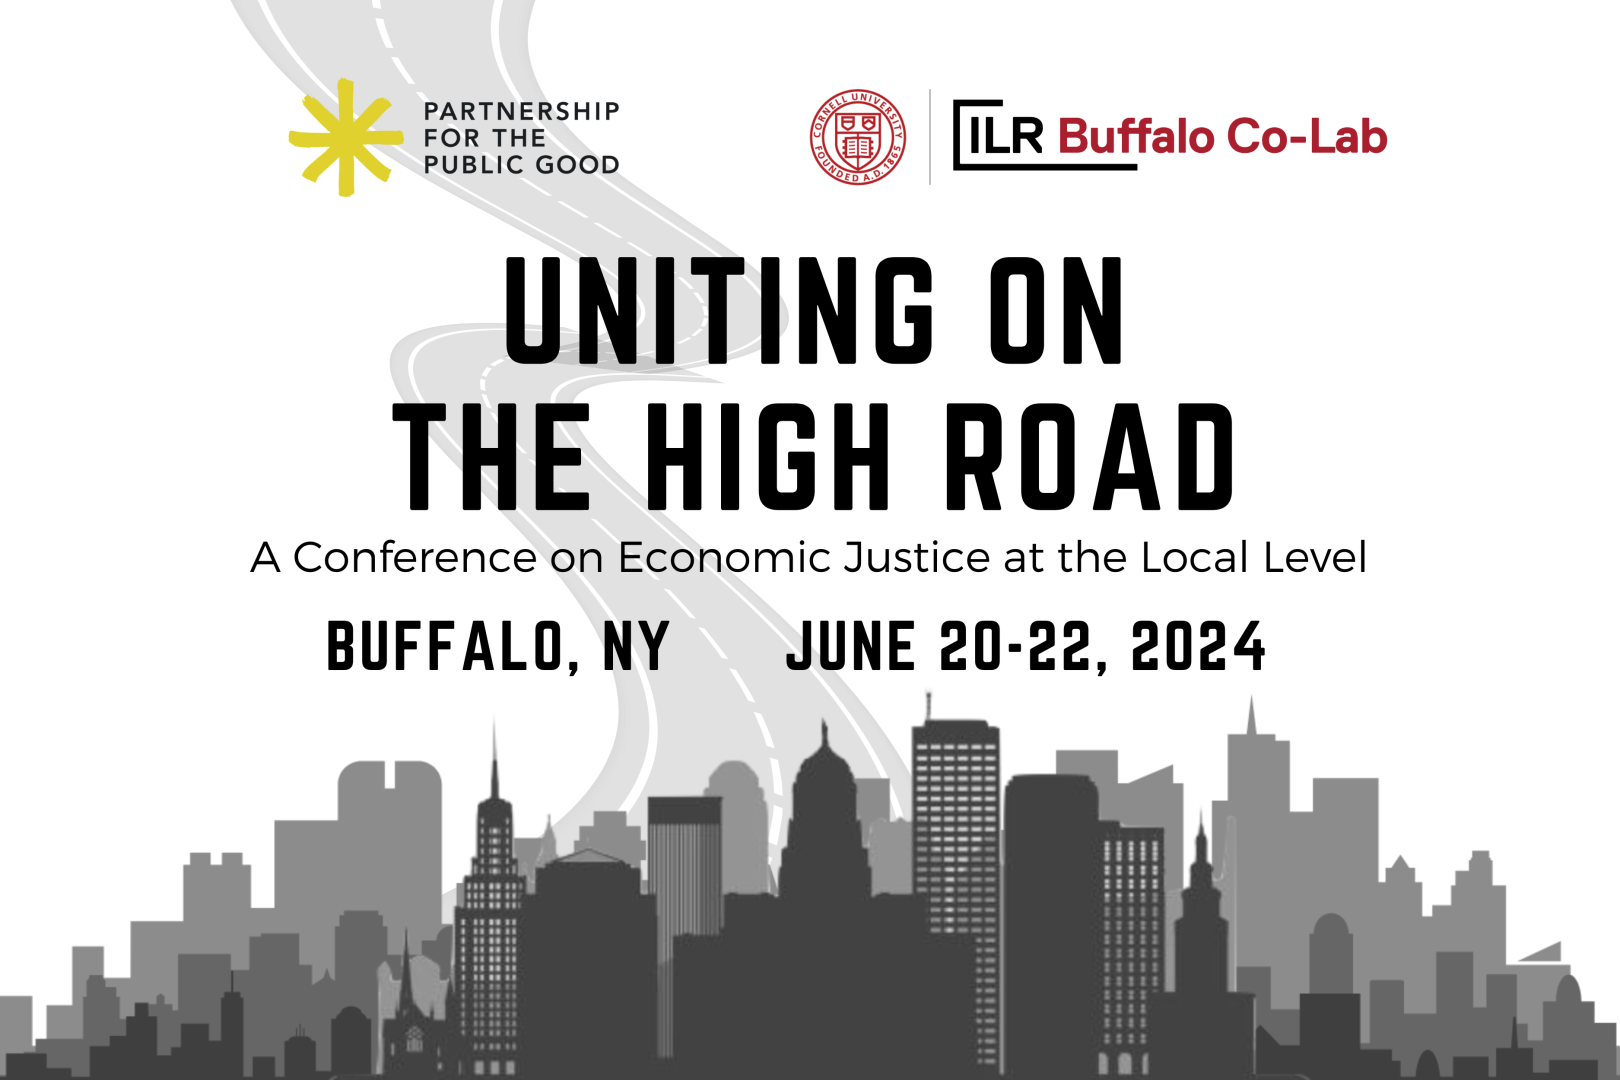 Uniting on the High Road Conference